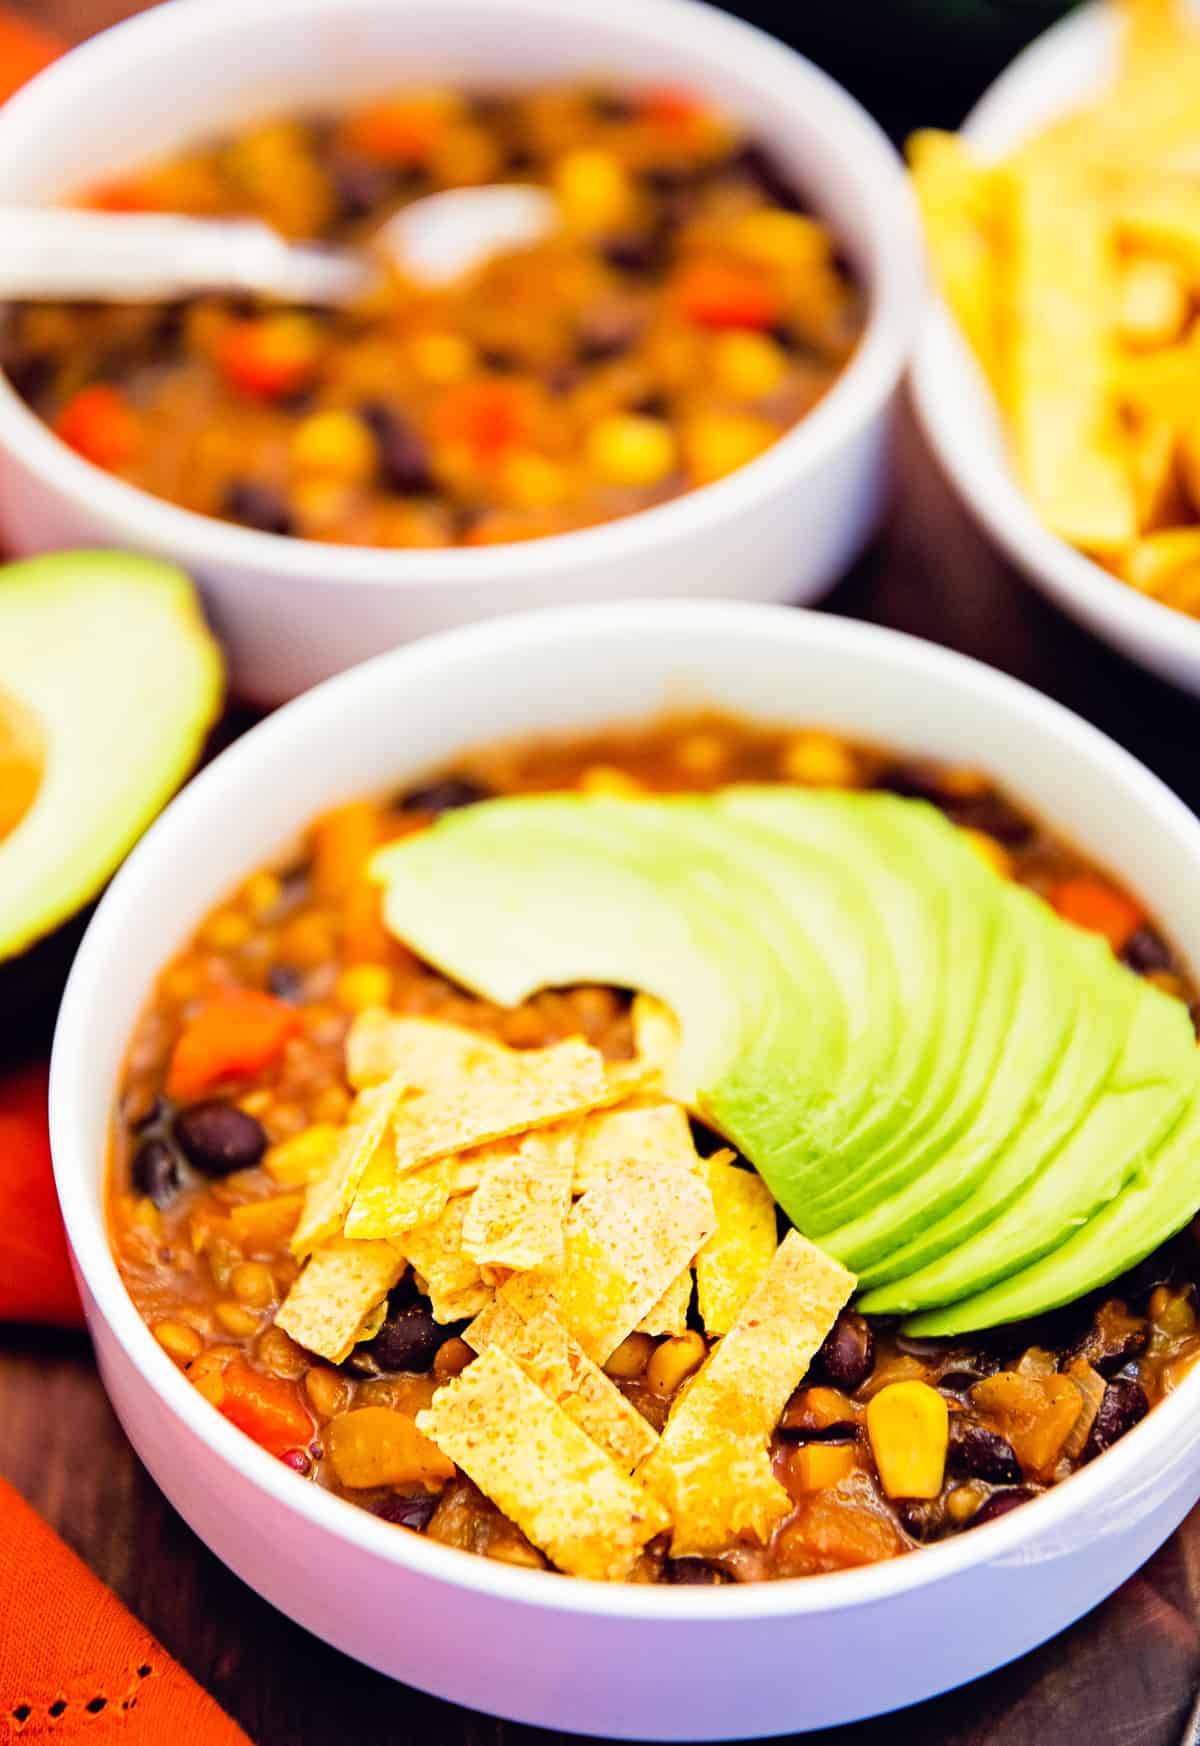 tortilla stew, soup, stew, recipe, vegan, vegetarian, whole food plant based, wfpb, gluten free, oil free, refined sugar free, no oil, no refined sugar, no dairy, dinner, lunch, appetizer, dinner party, entertaining, simple, healthy